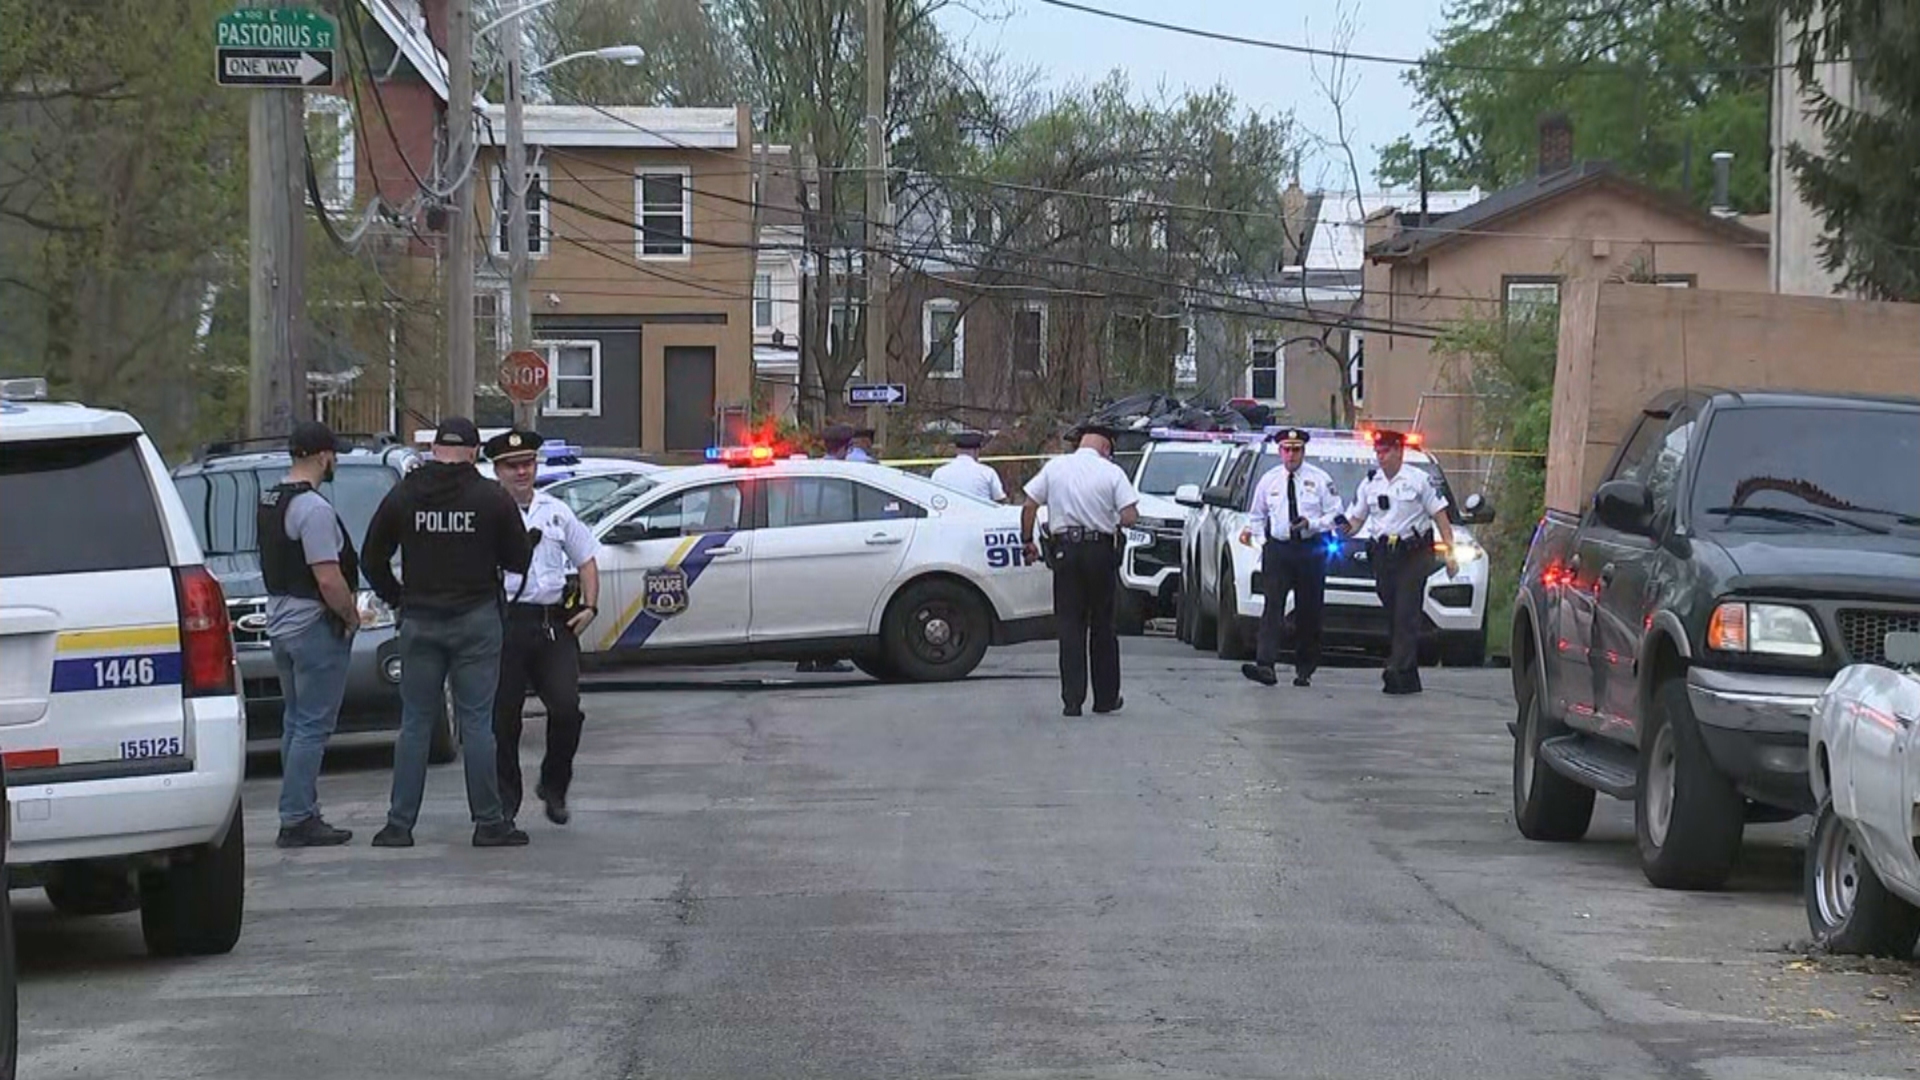 Philadelphia Police Fire At 3 Men After Witnessing Fatal Drive-By Shooting In East Germantown